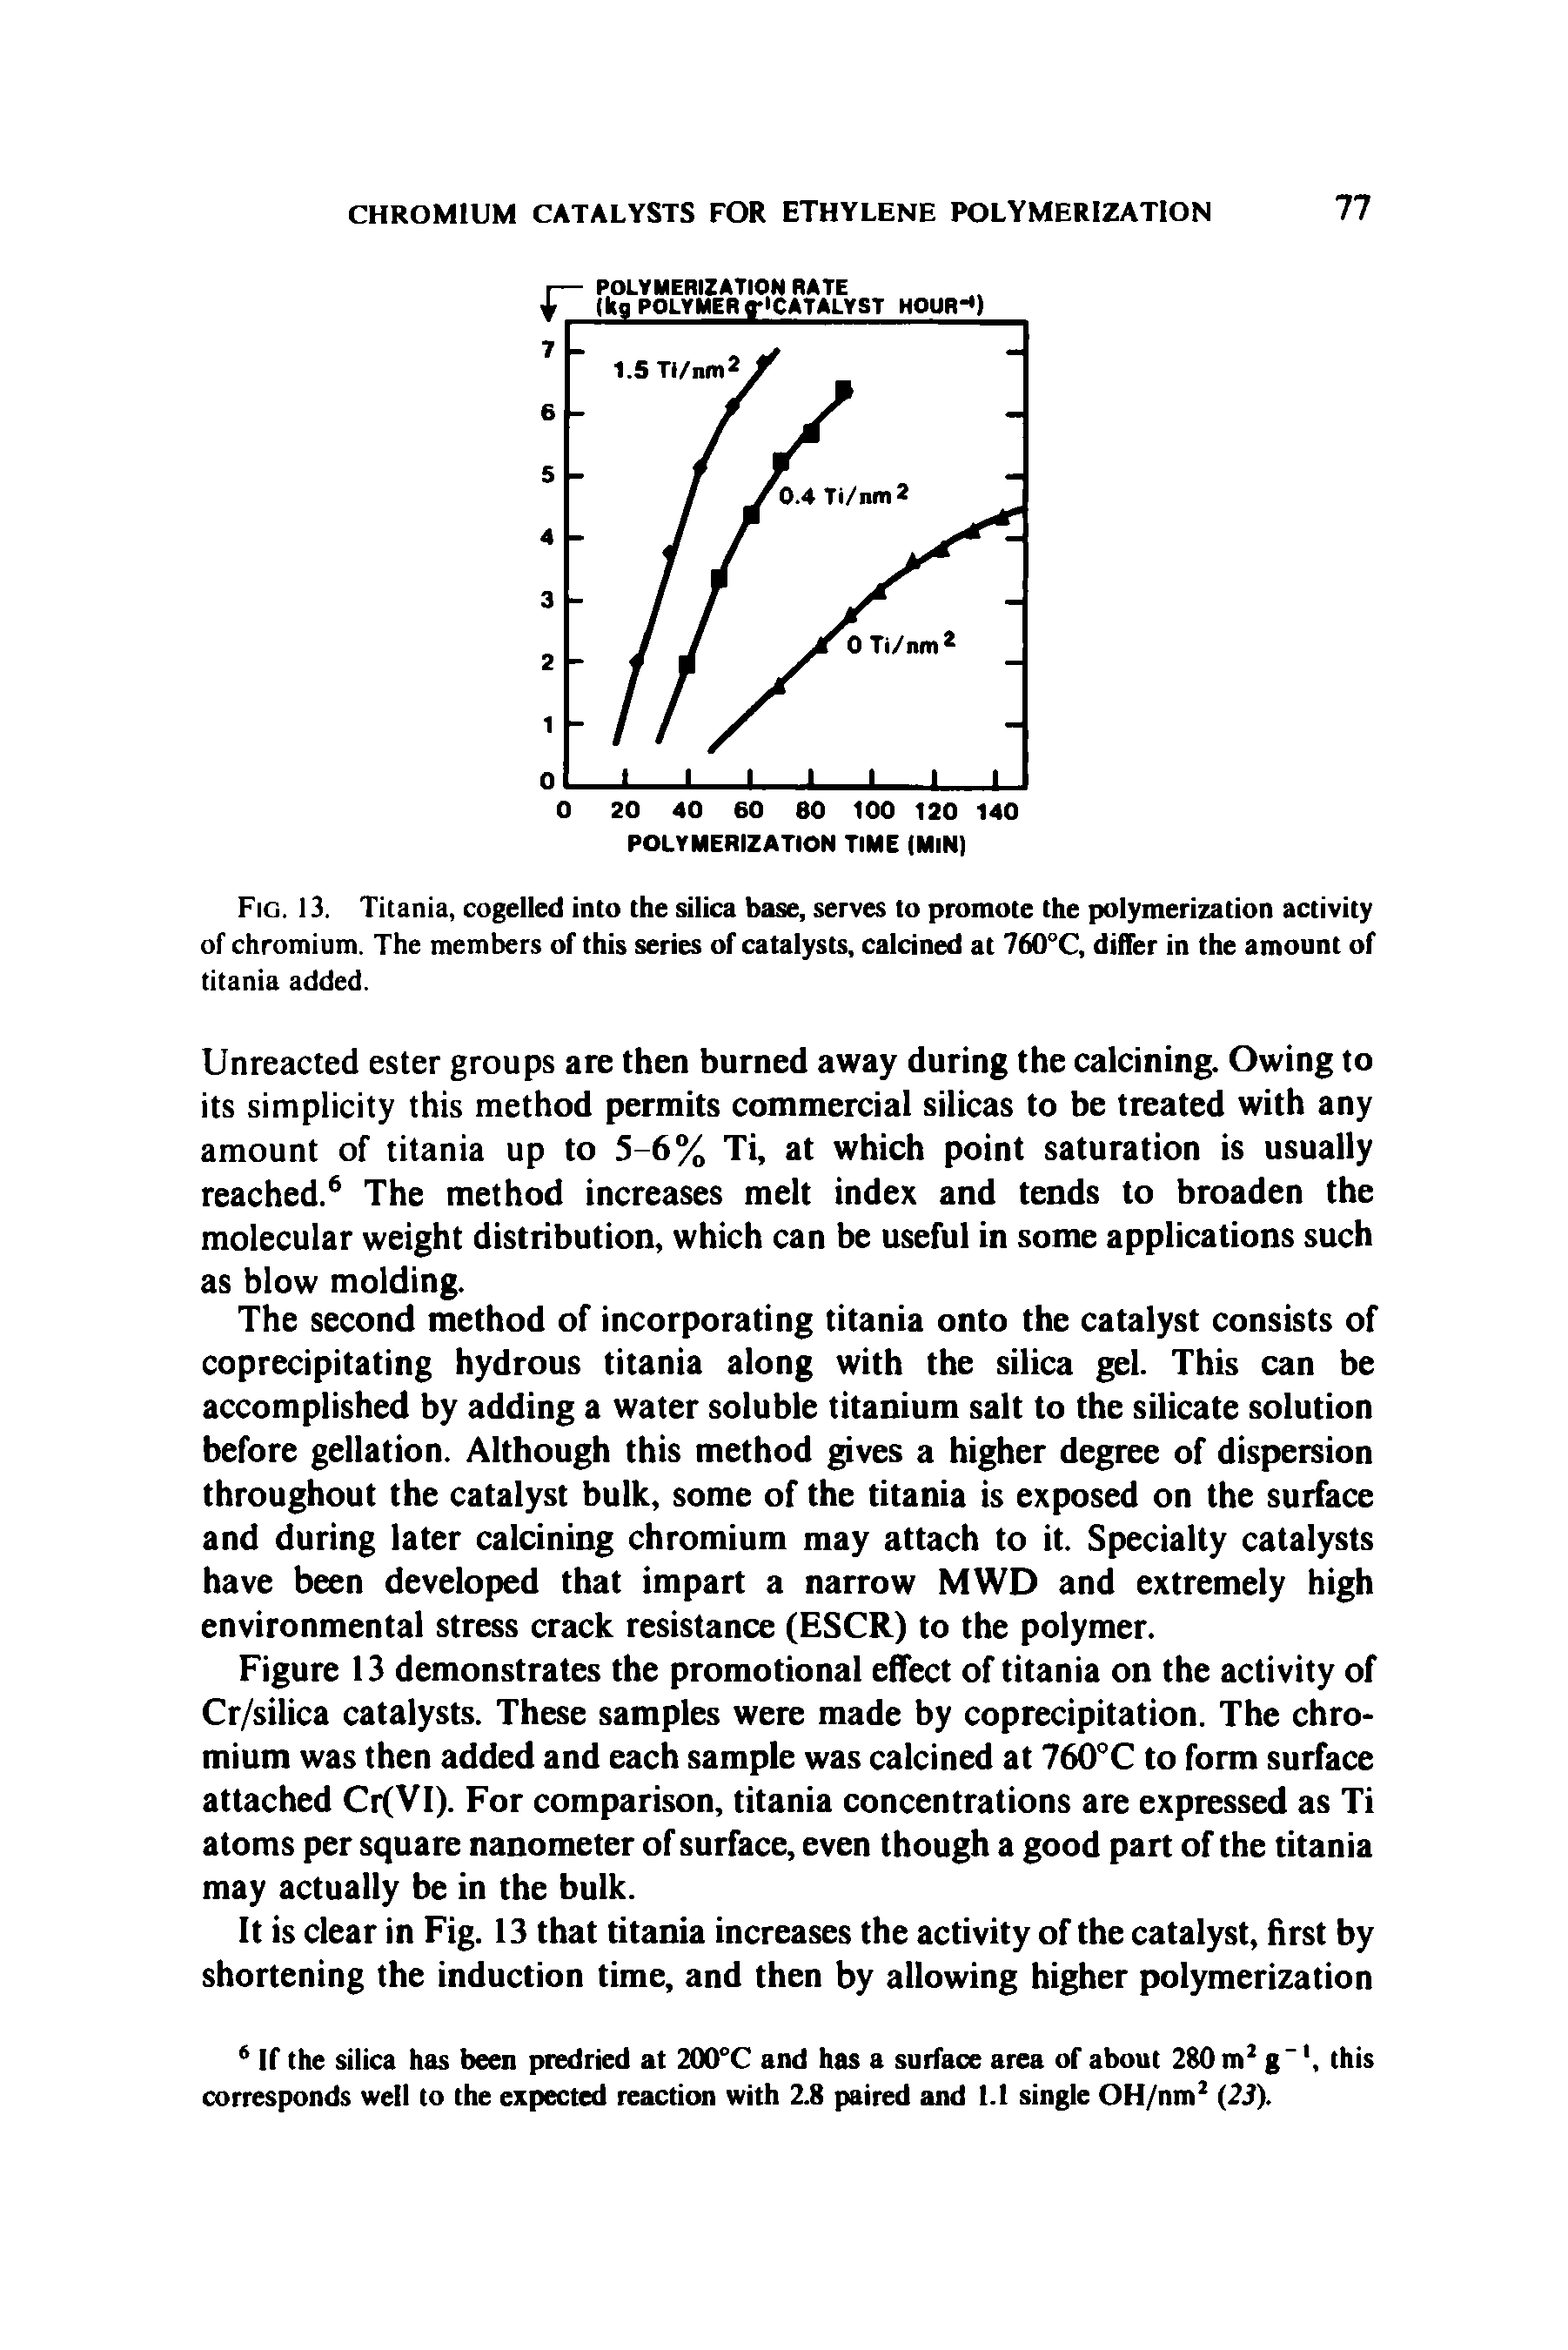 Fig. 13. Titania, cogelled into the silica base, serves to promote the polymerization activity of chromium. The members of this series of catalysts, calcined at 760°C, differ in the amount of titania added.